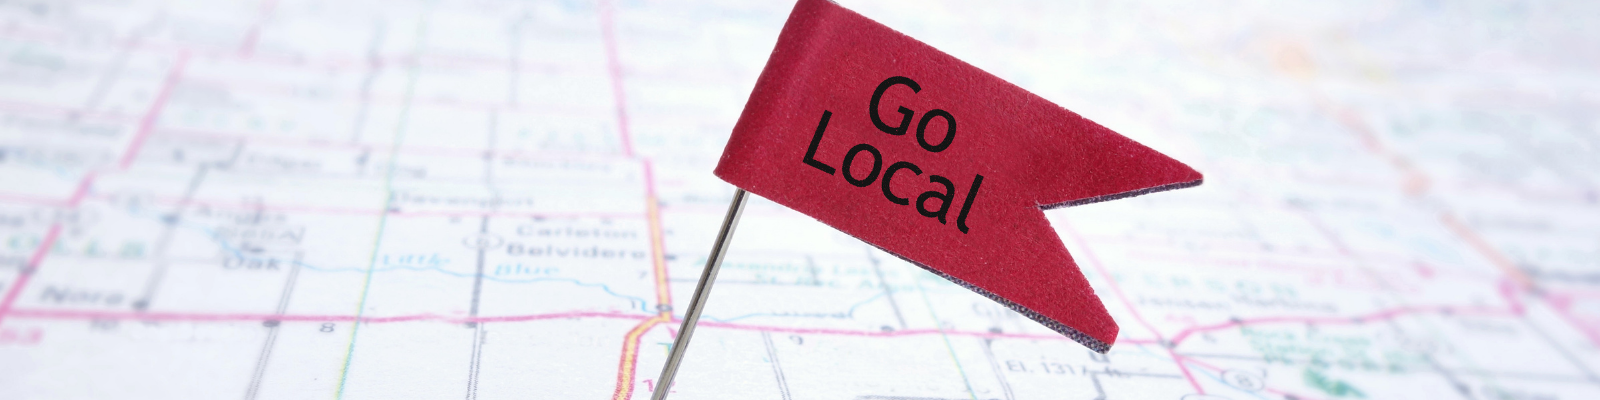 how to dominate local seo